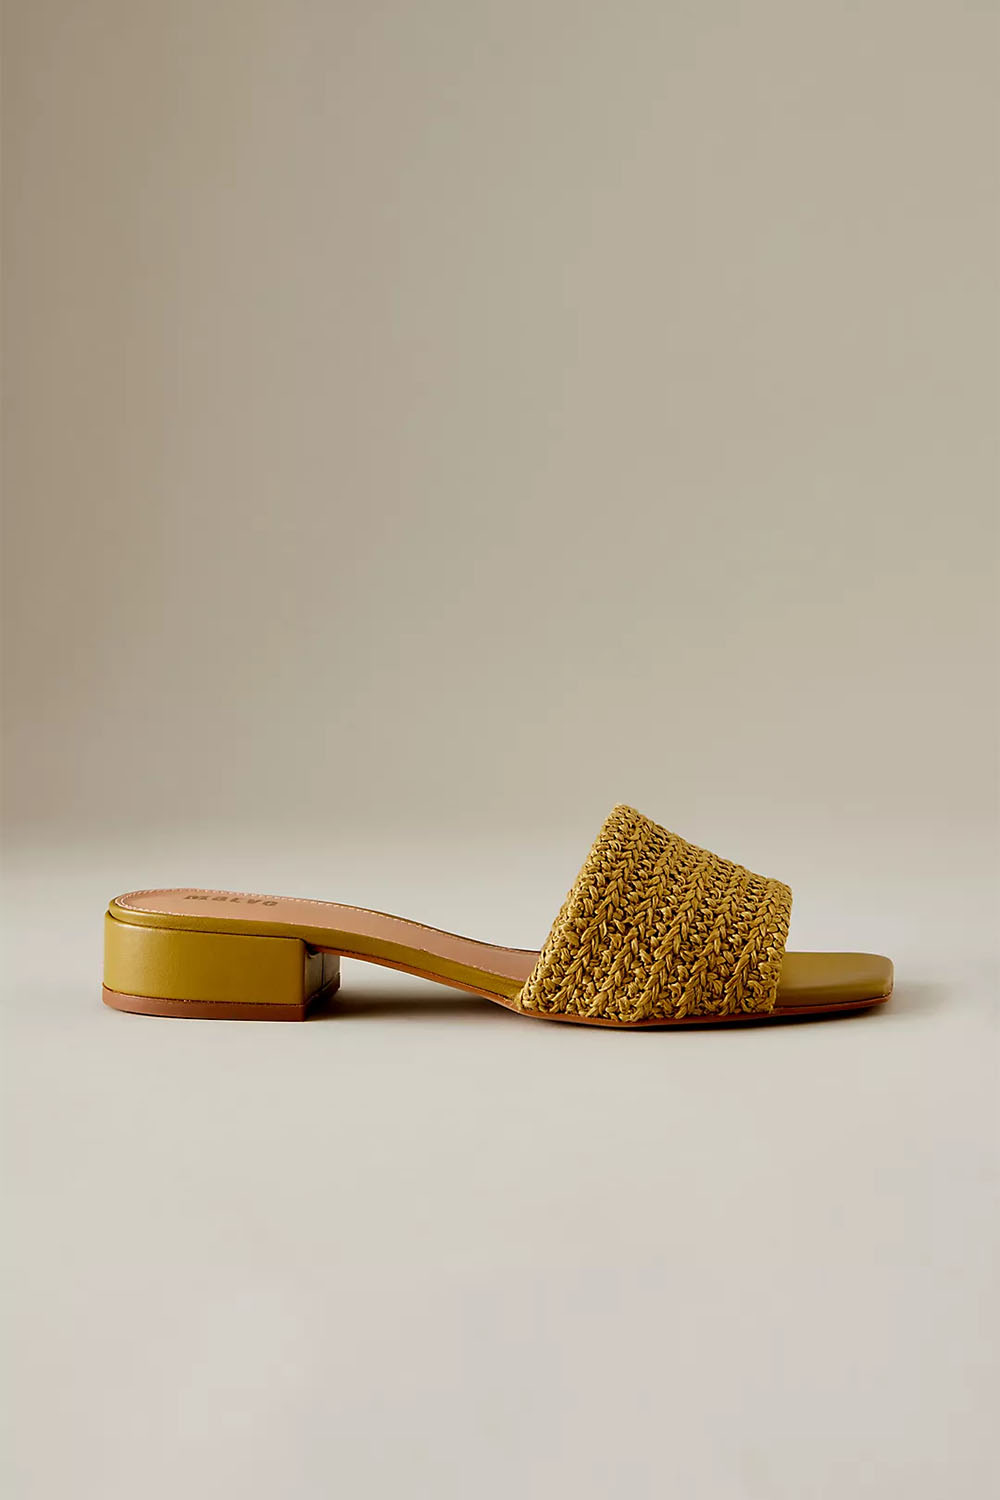 Anthropologie woven mules